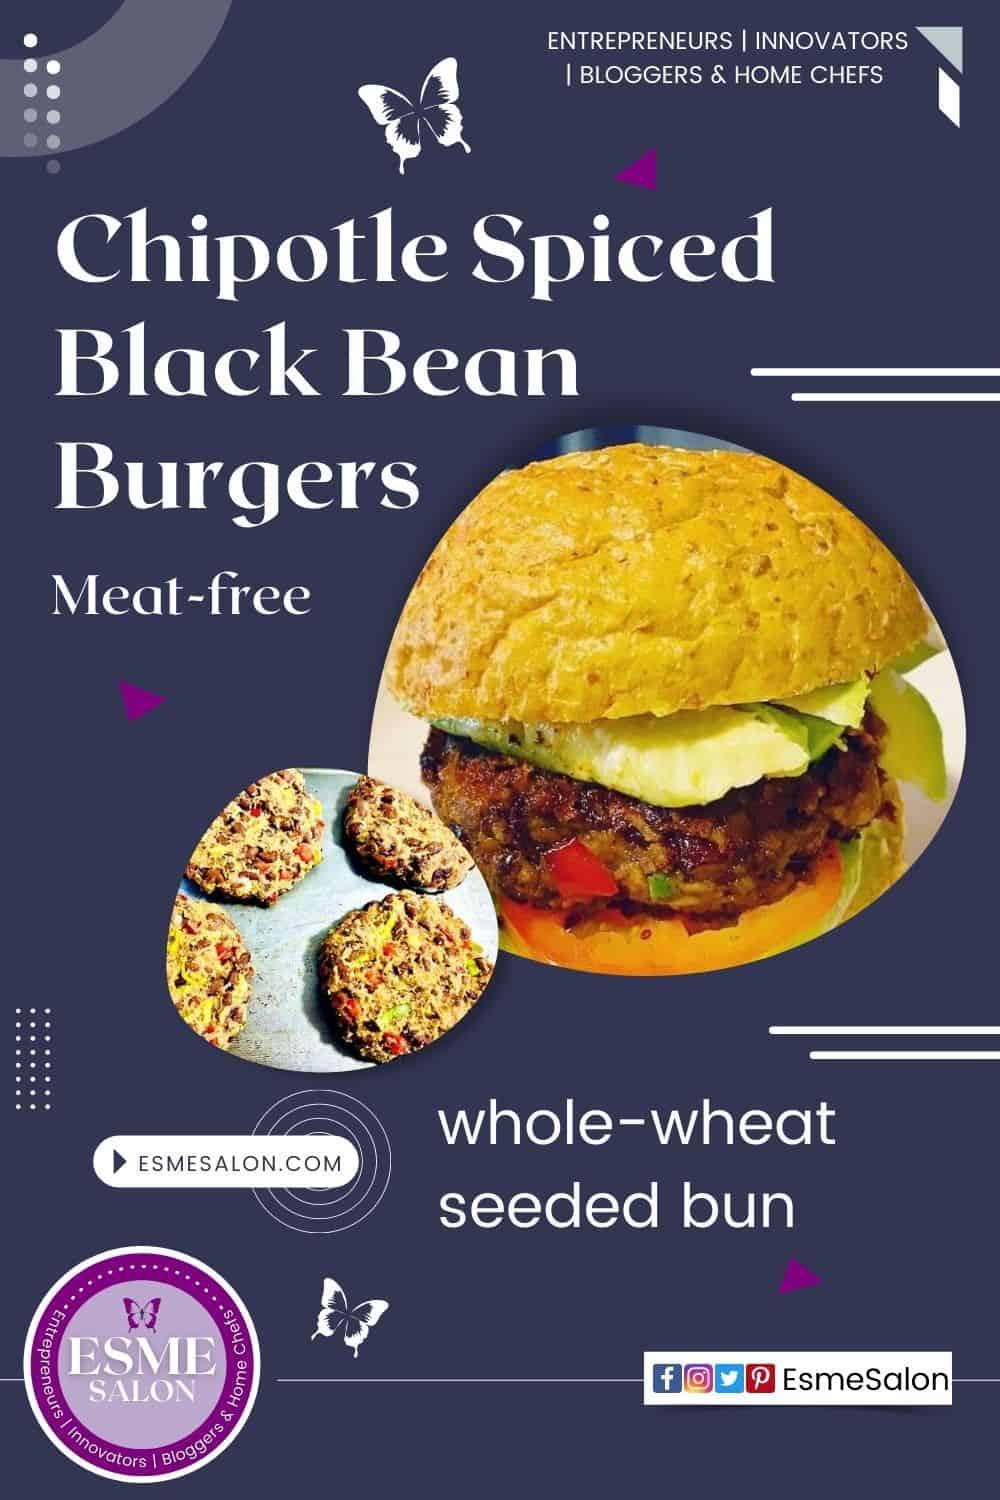 A meat-free burger on a whole-wheat seeded bun and 4 meat-free patties on a silver metal tray